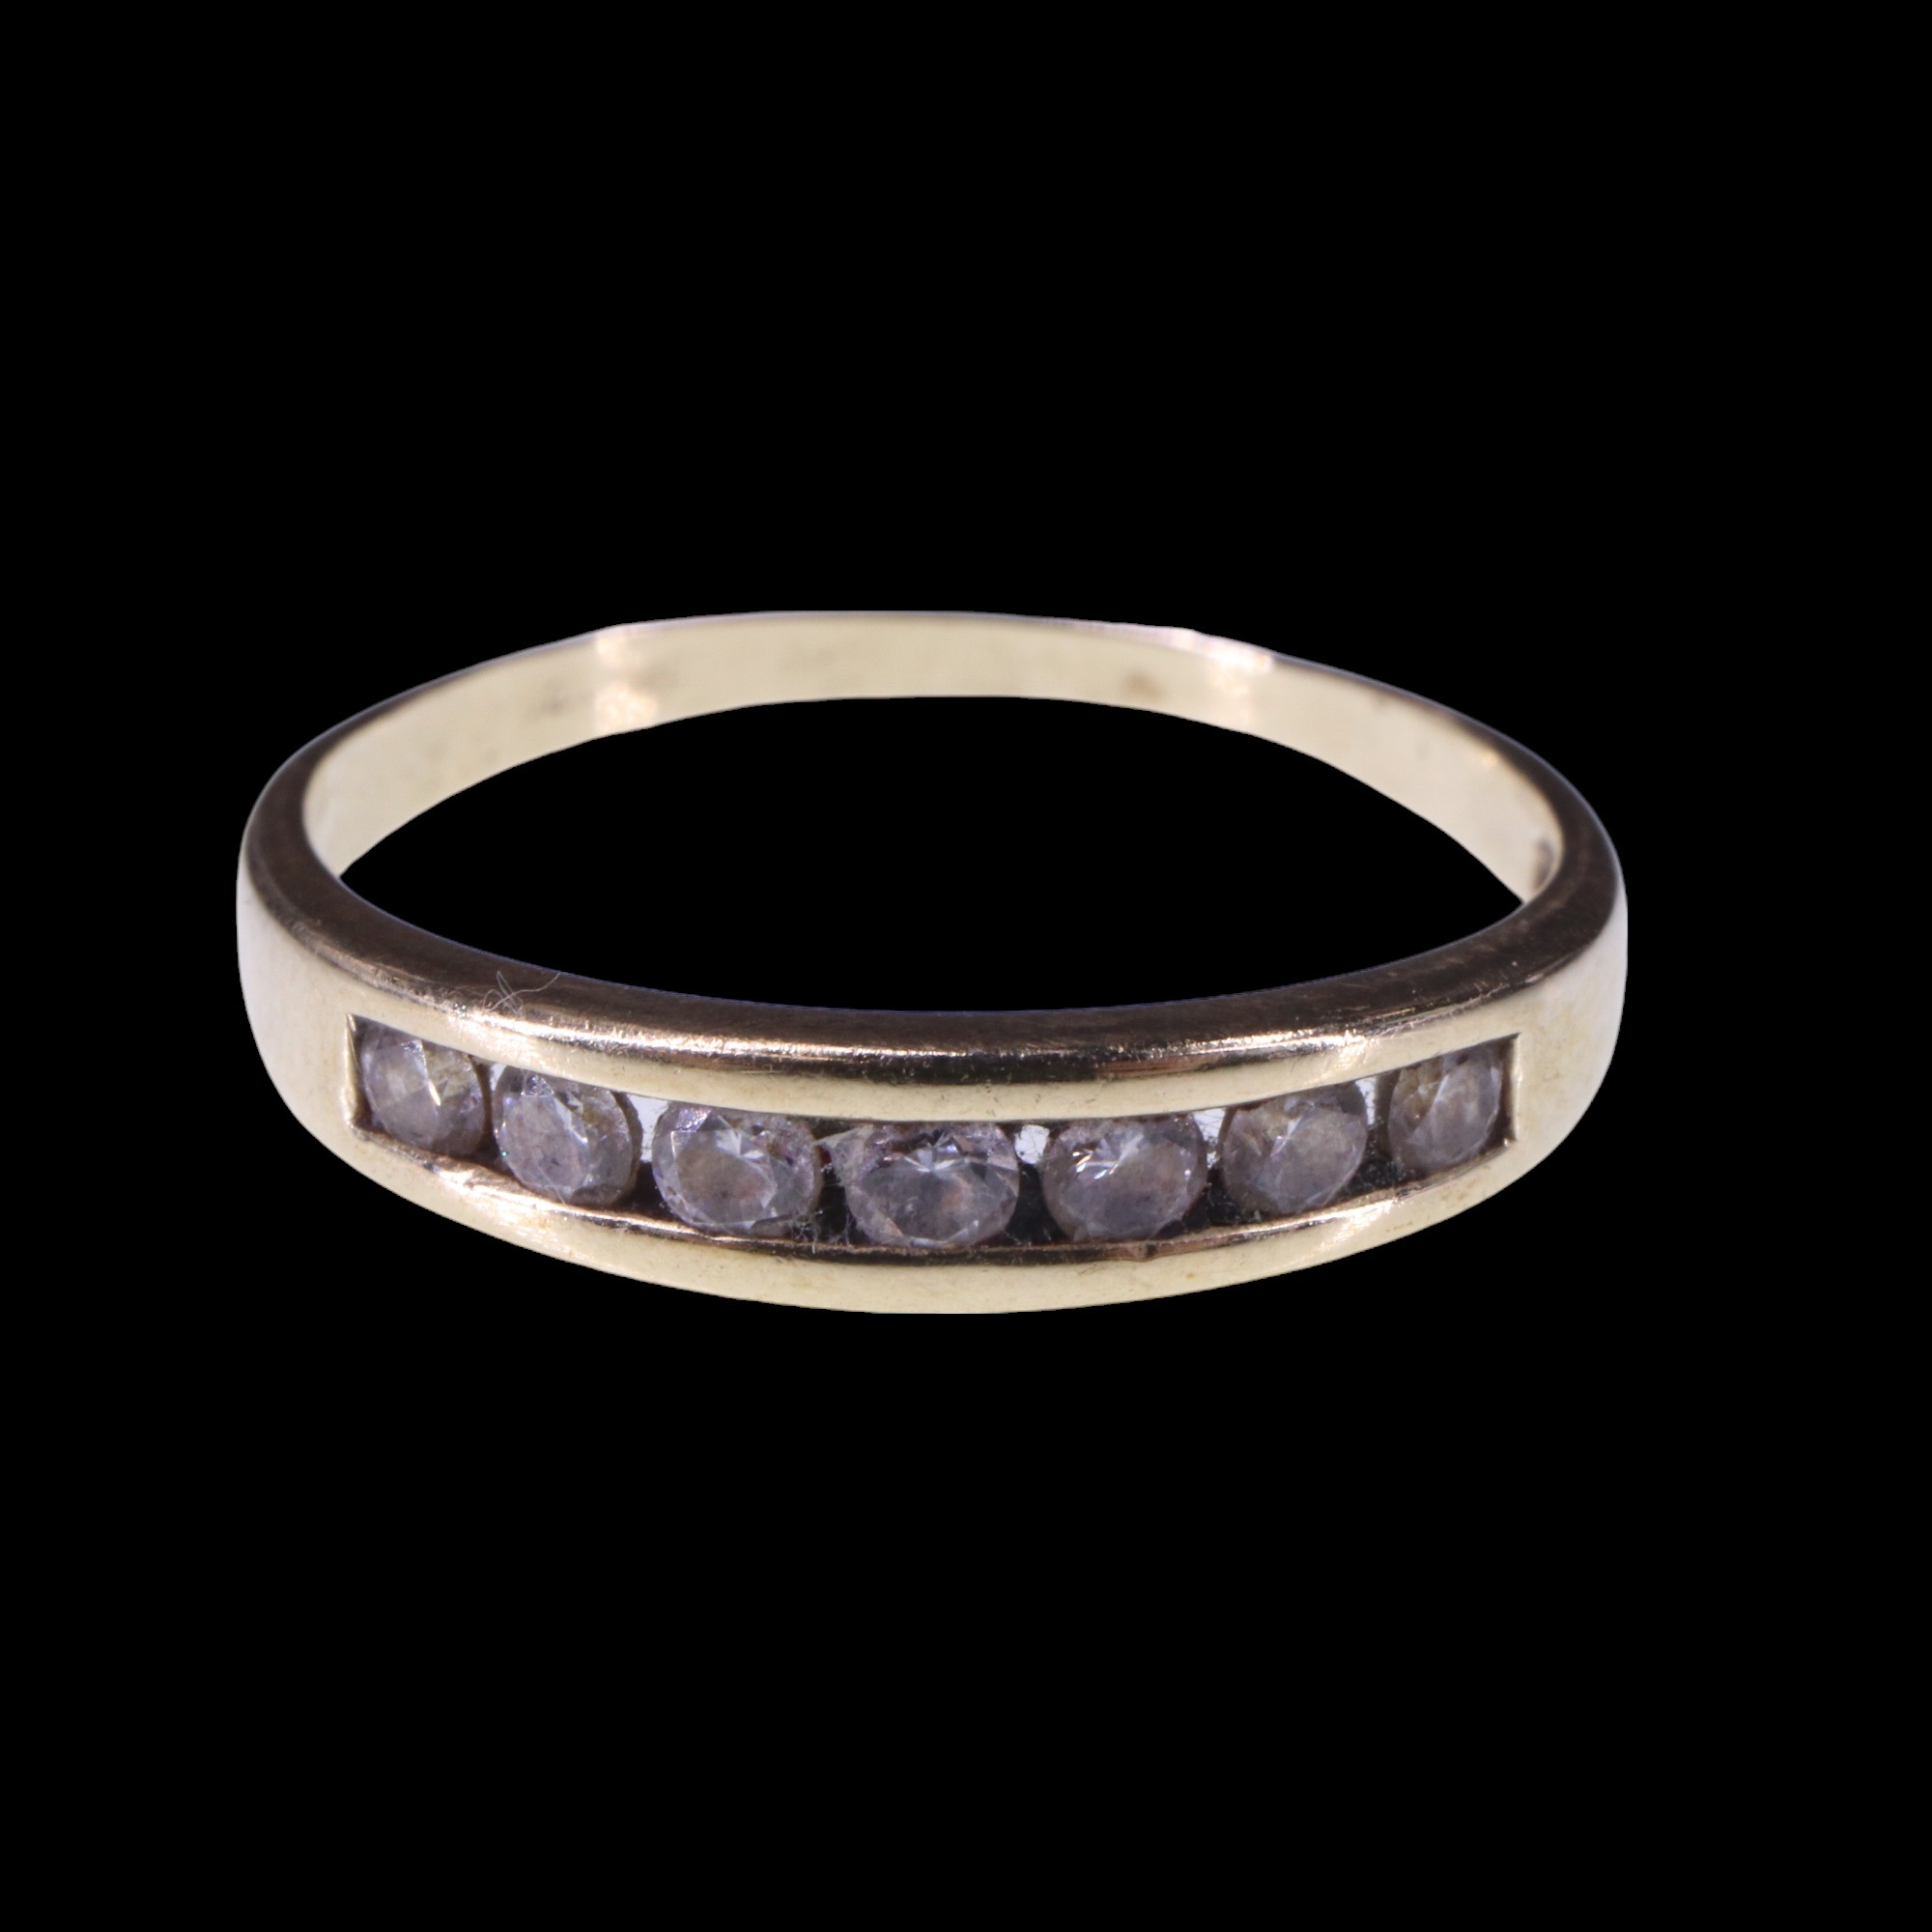 A contemporary channel-set paste and 9 ct yellow metal half-hoop eternity ring, Q/R, 1.6 g - Image 2 of 3